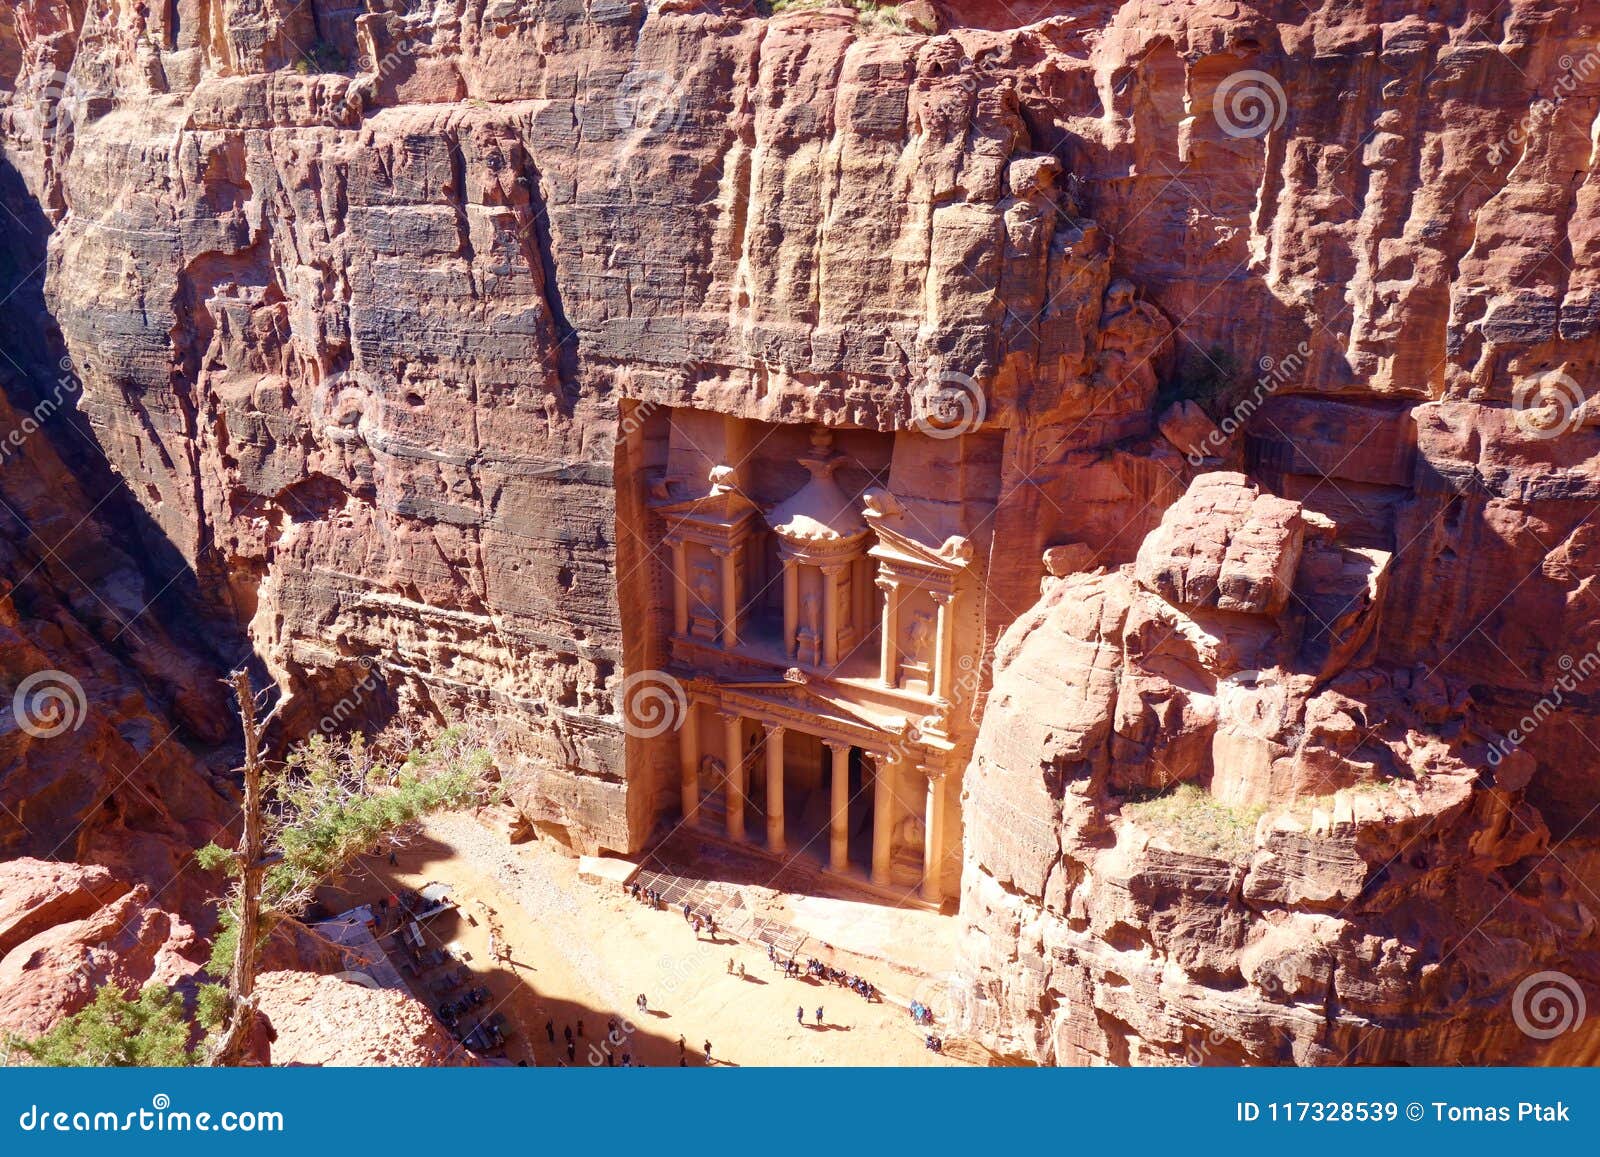 Treasury from Above. Al Khazneh the Ancient City of Petra, Jordan, UNESCO World Heritage Site Stock Image - Image of east, 117328539